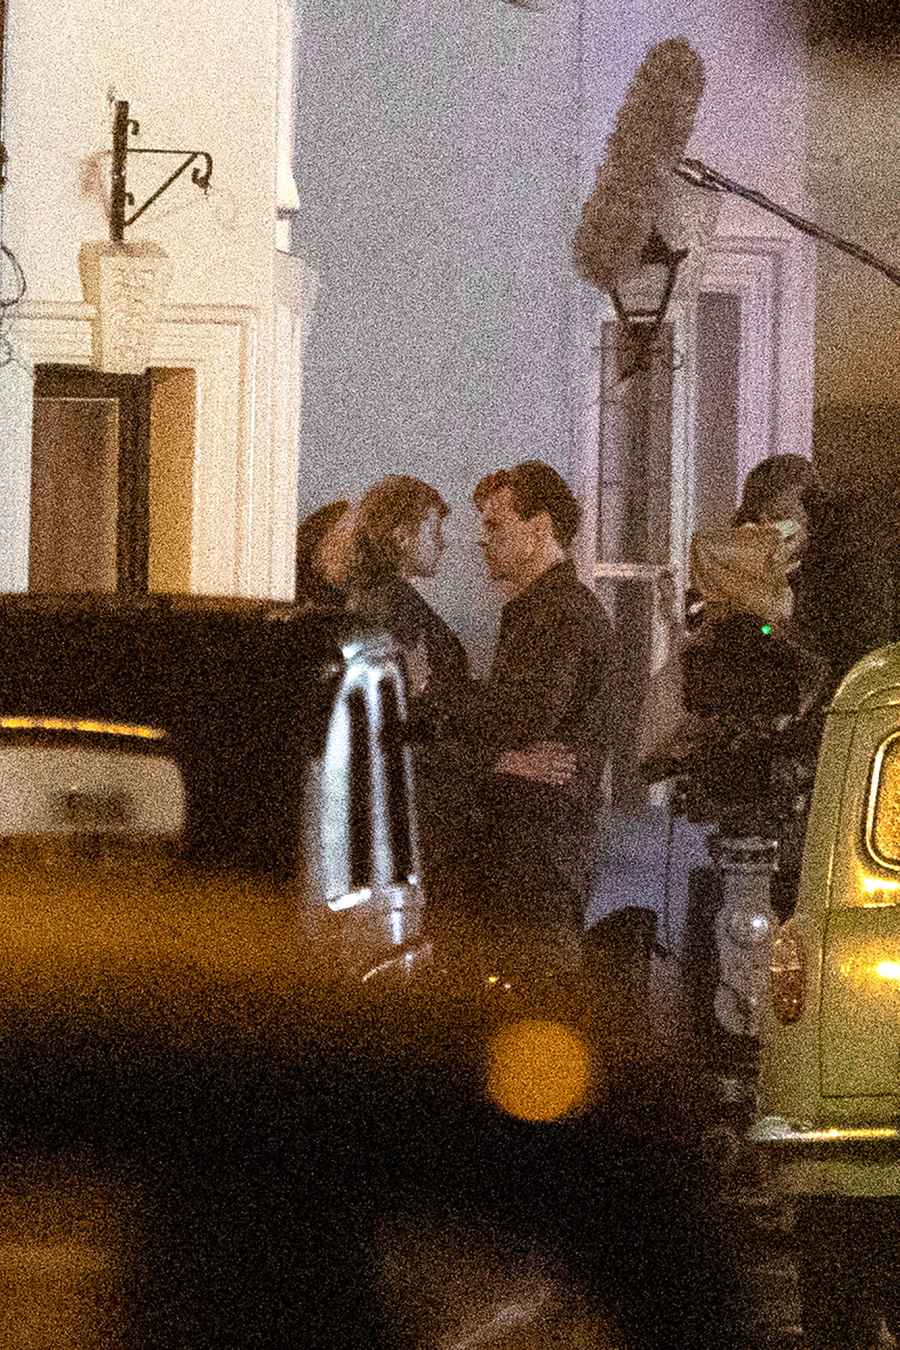 Harry Styles and The Crown Emma Corrin Kiss Passionately on the My Policeman Set 4